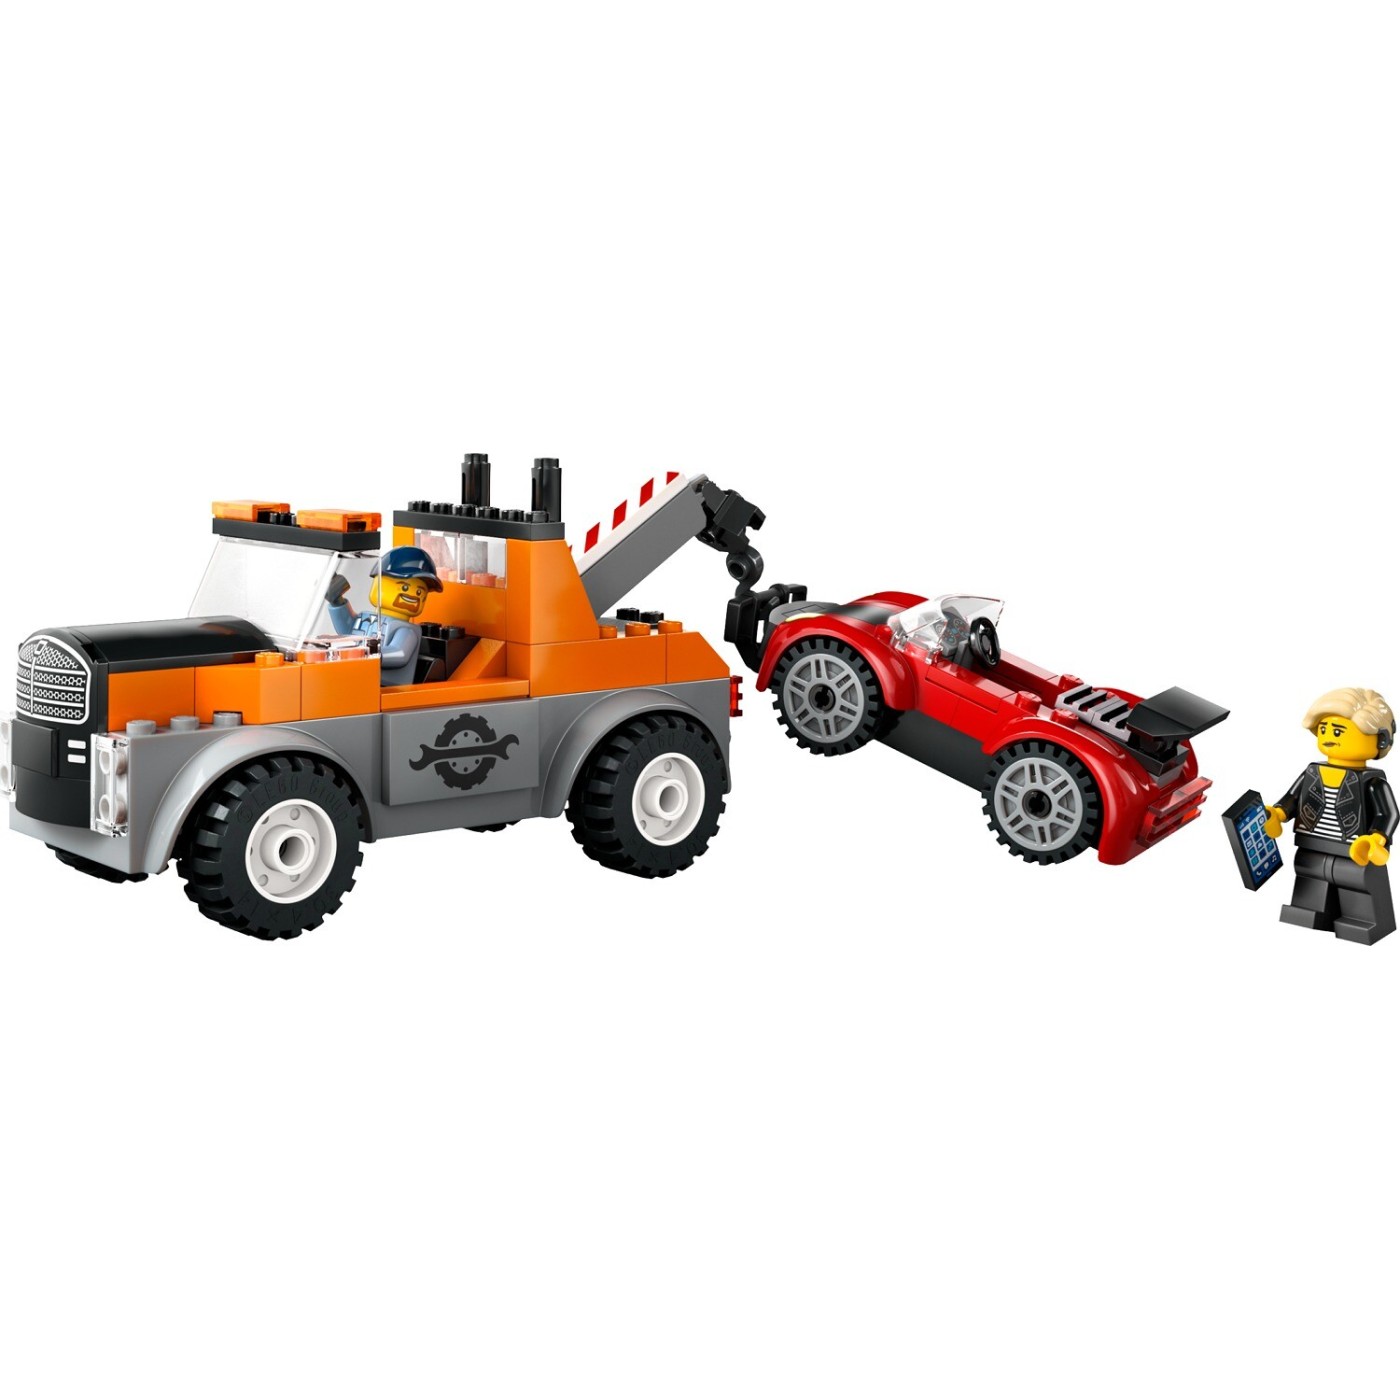 Lego City Tow Truck And Sports Car Repair (60435)